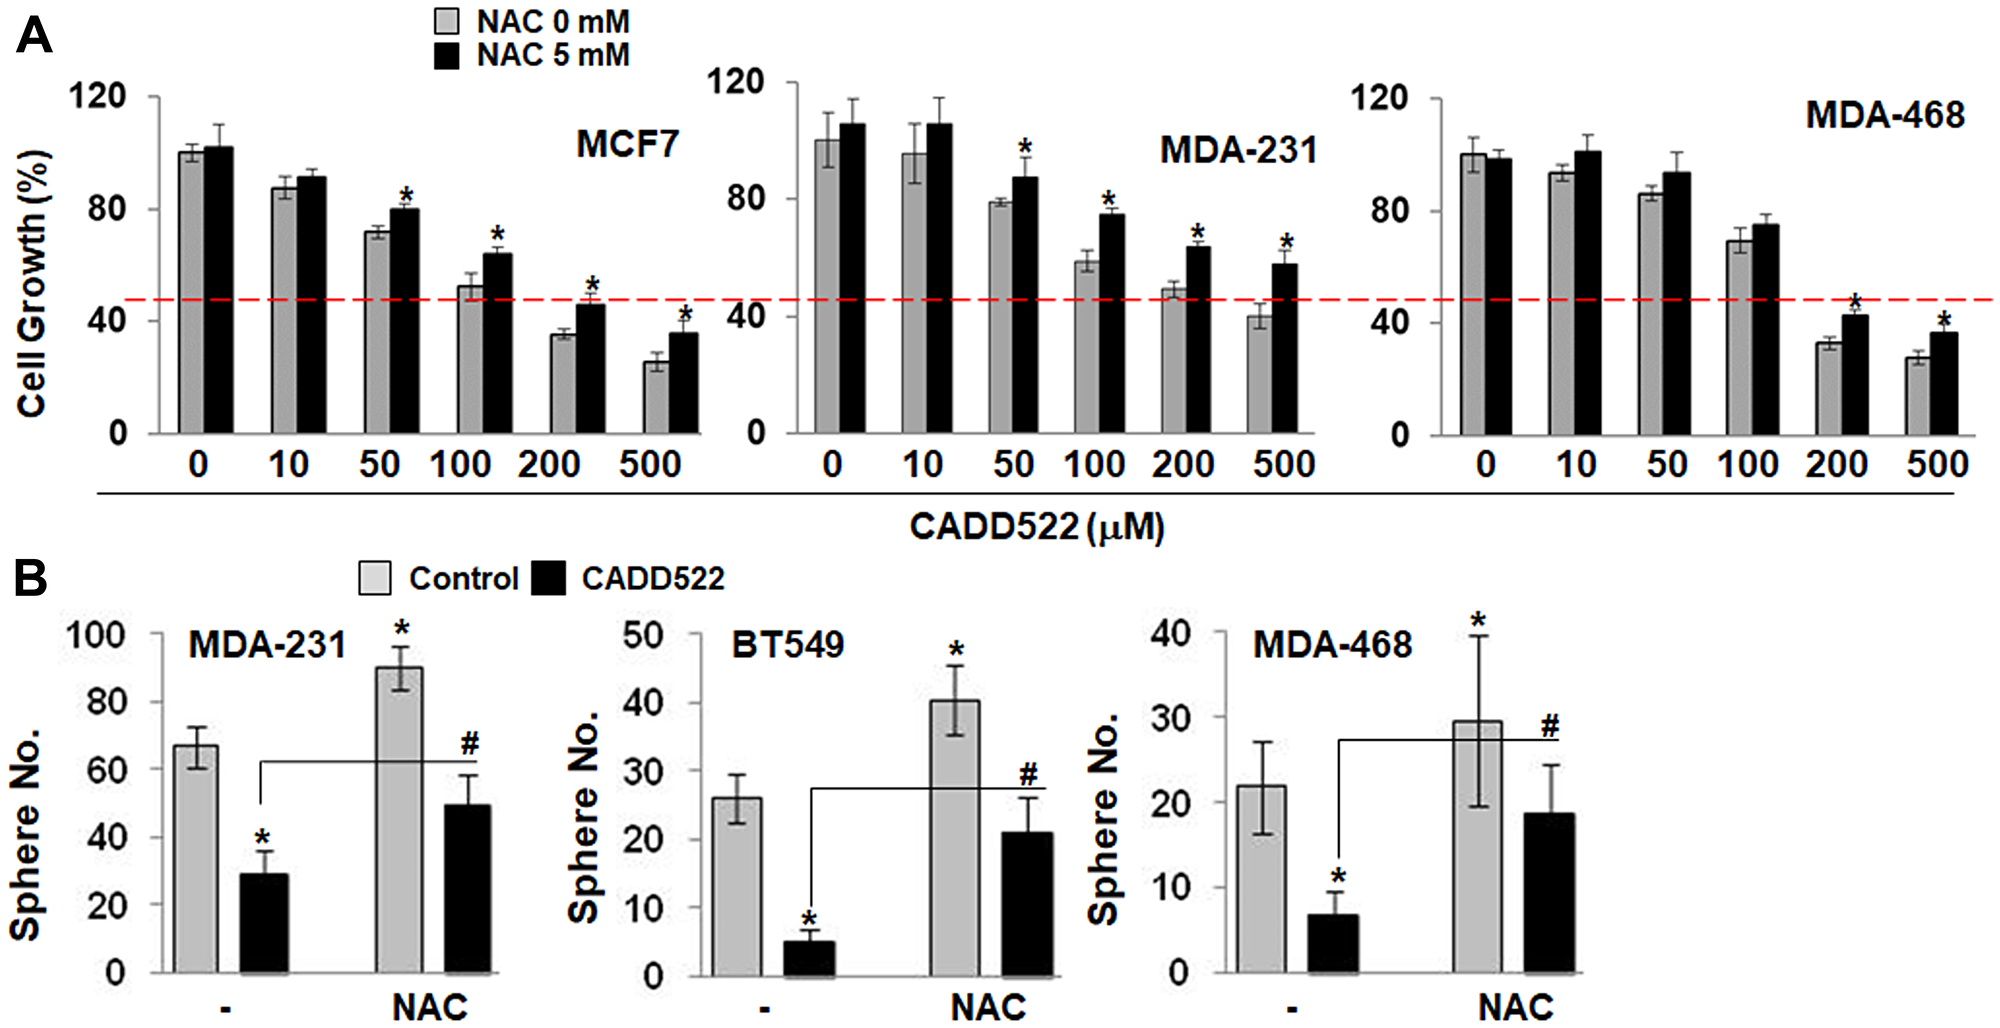 NAC protects BC cells from CADD522-mediated growth inhibition.